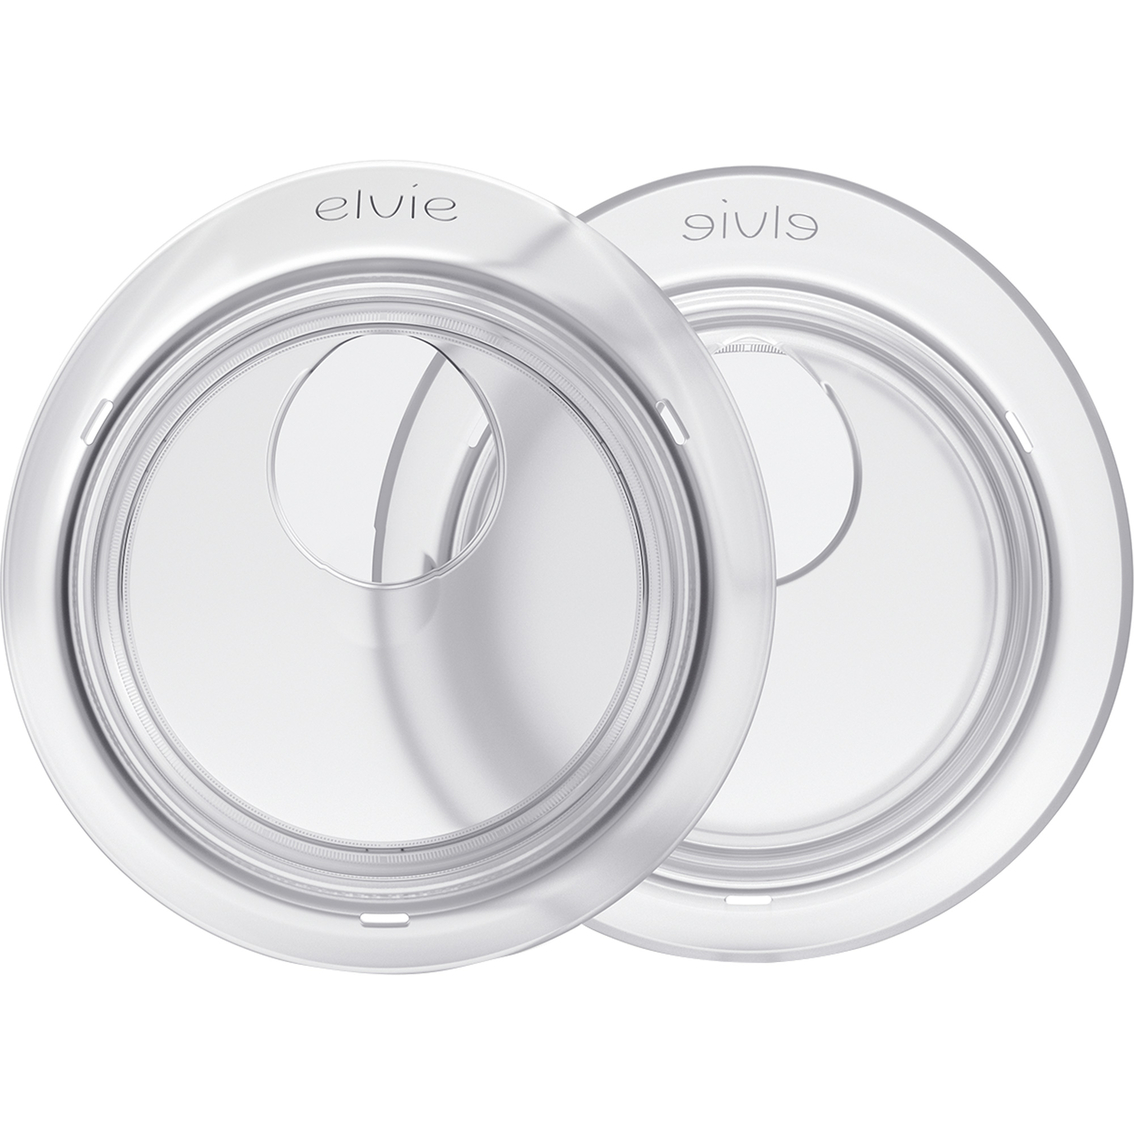 Elvie Catch Breast Milk Collection Cups 2 ct. - Image 2 of 8